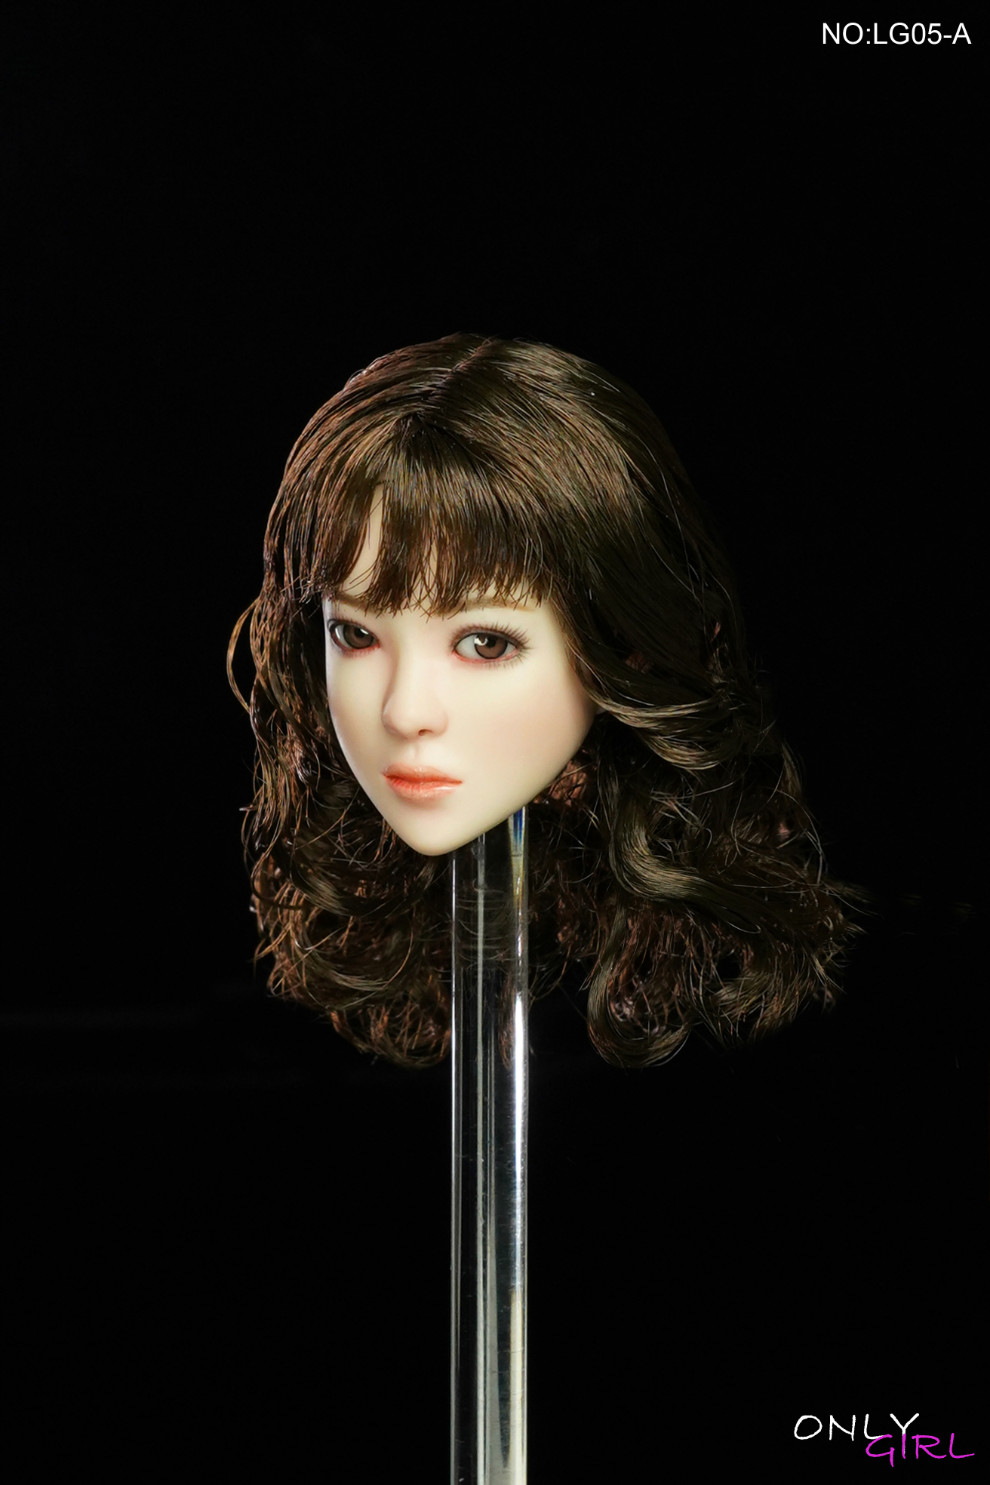 headsculpt - NEW PRODUCT: ONLYGIRL: 1/6 LG05 movable eye female head carving - ABC three models 4196